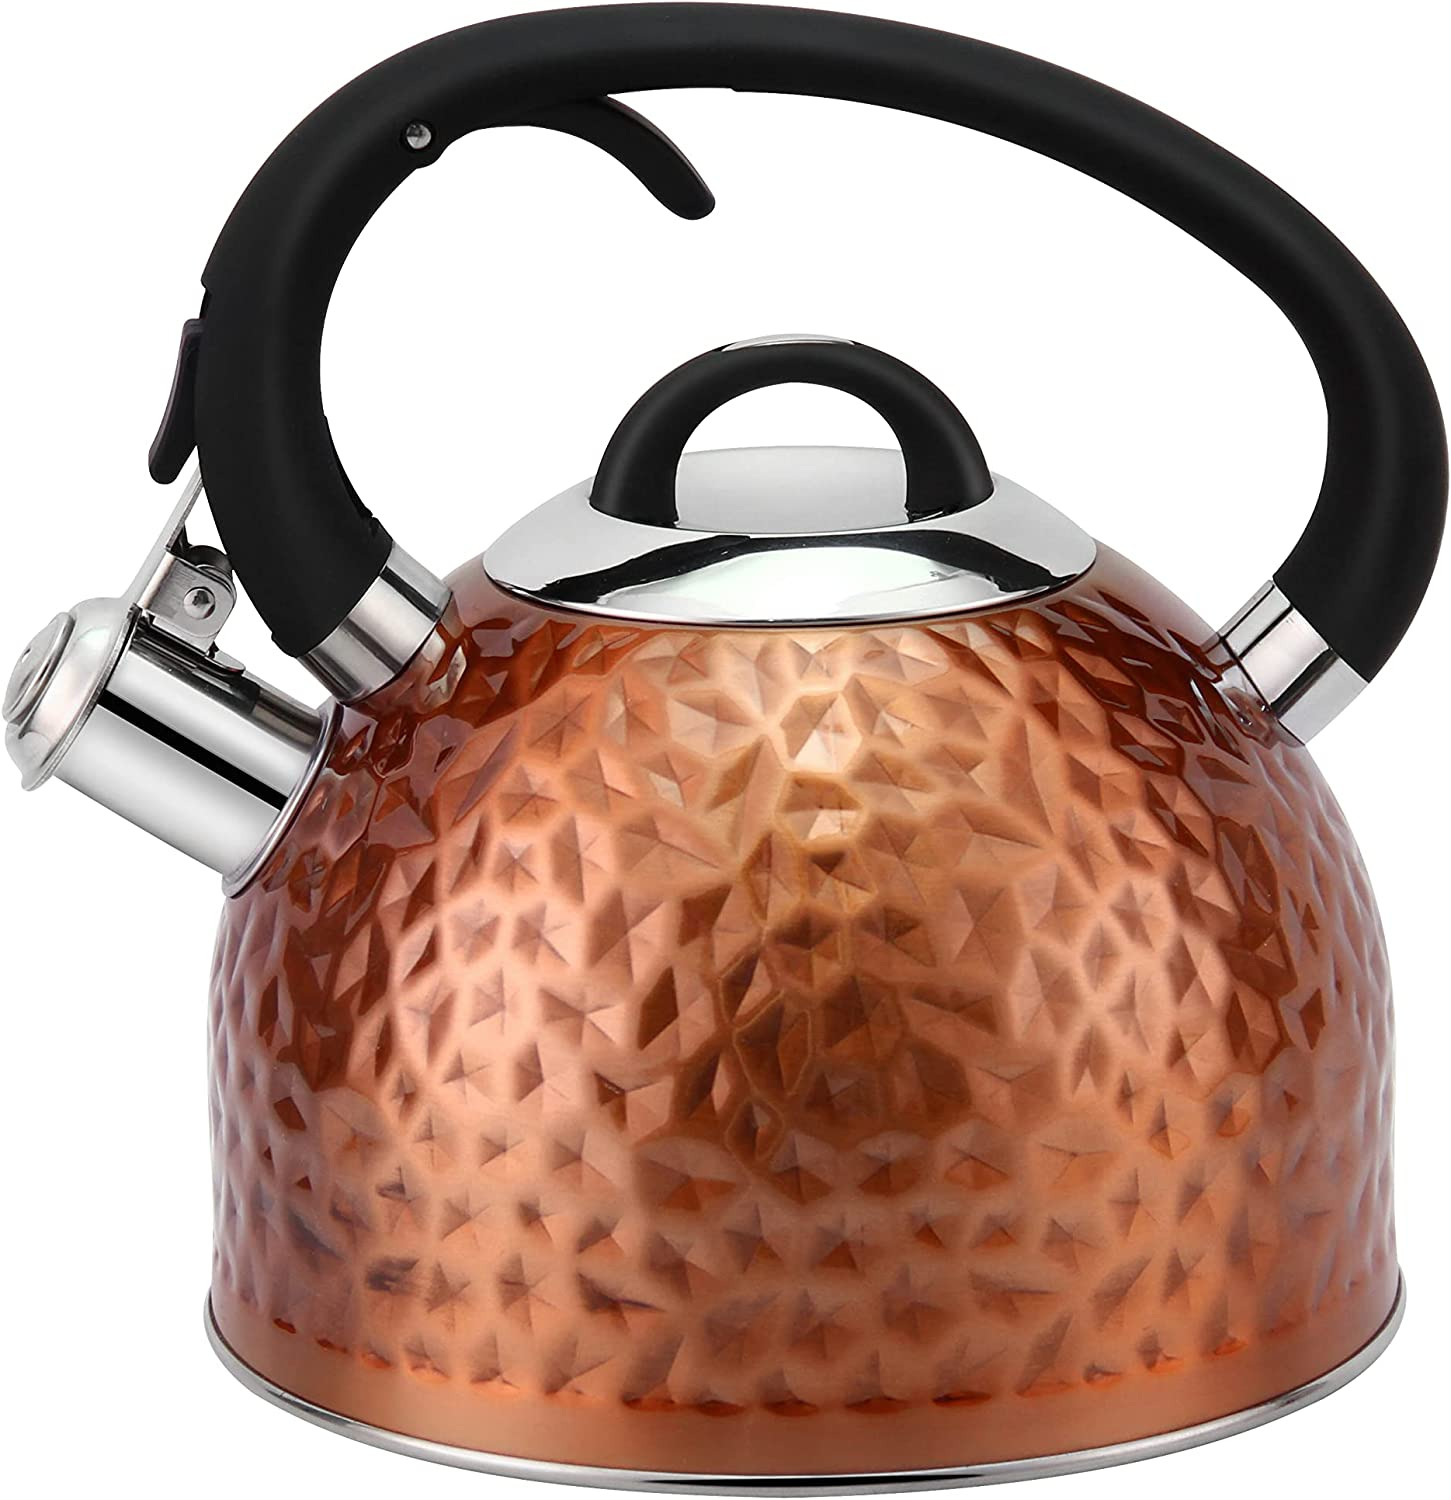 Copper Tea Kettle Stainless Steel Teapot Whistling Kettle Unique Butto